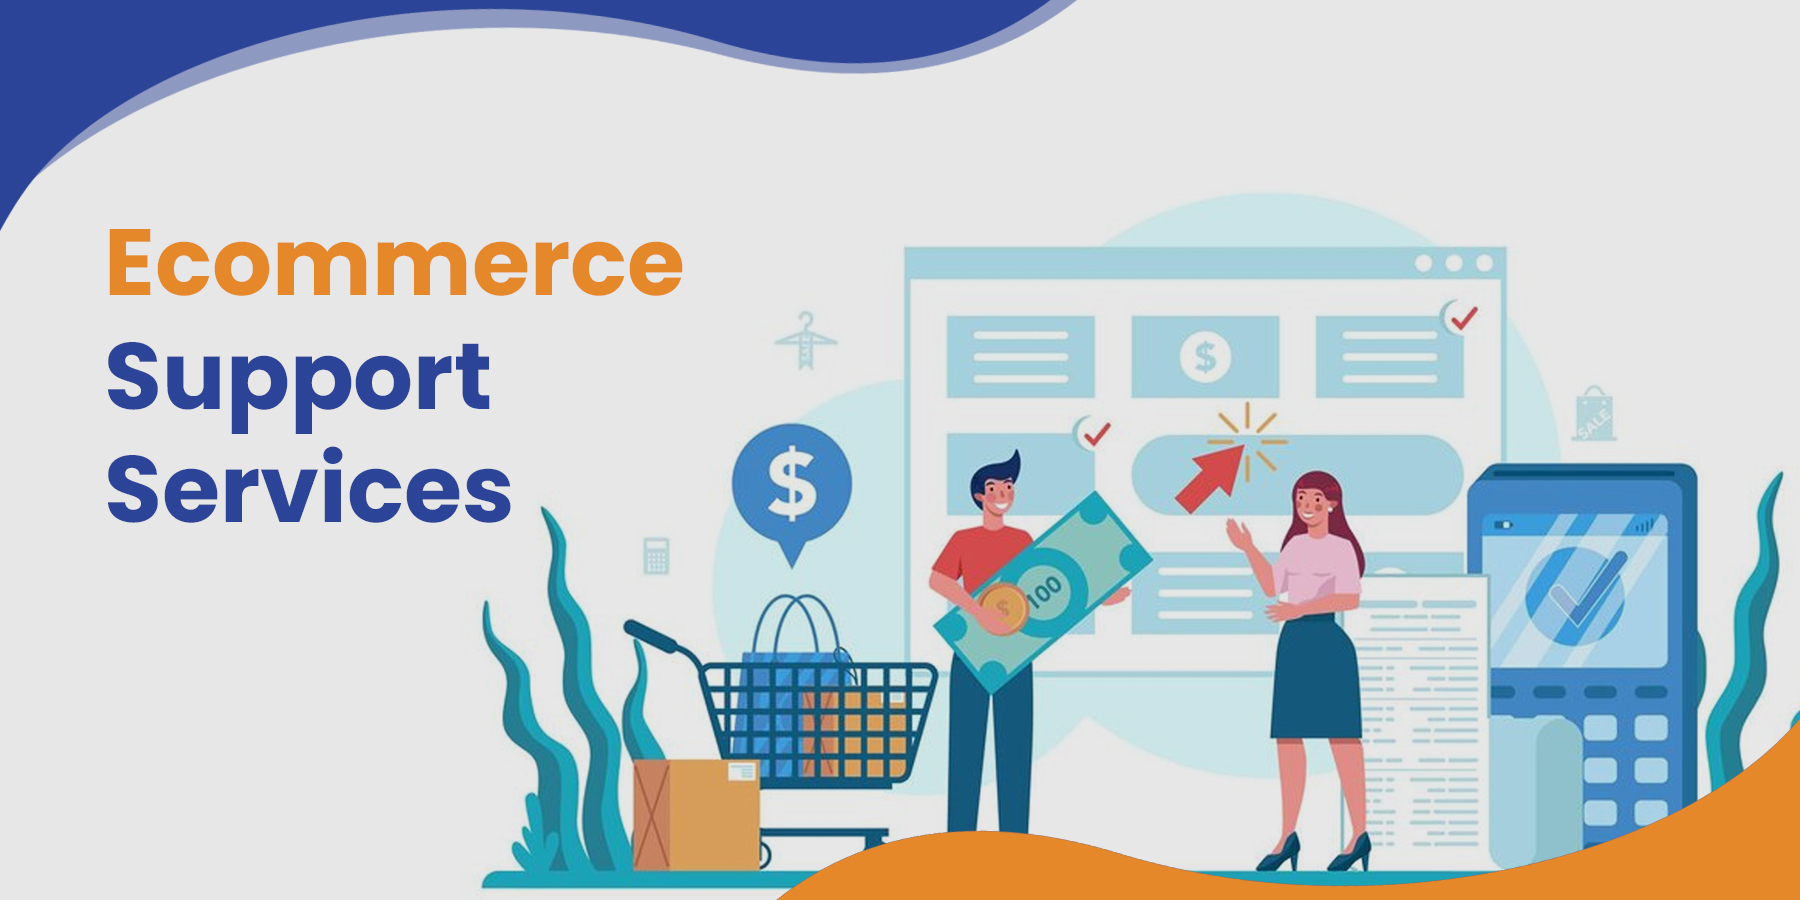 Ecommerce Support Services